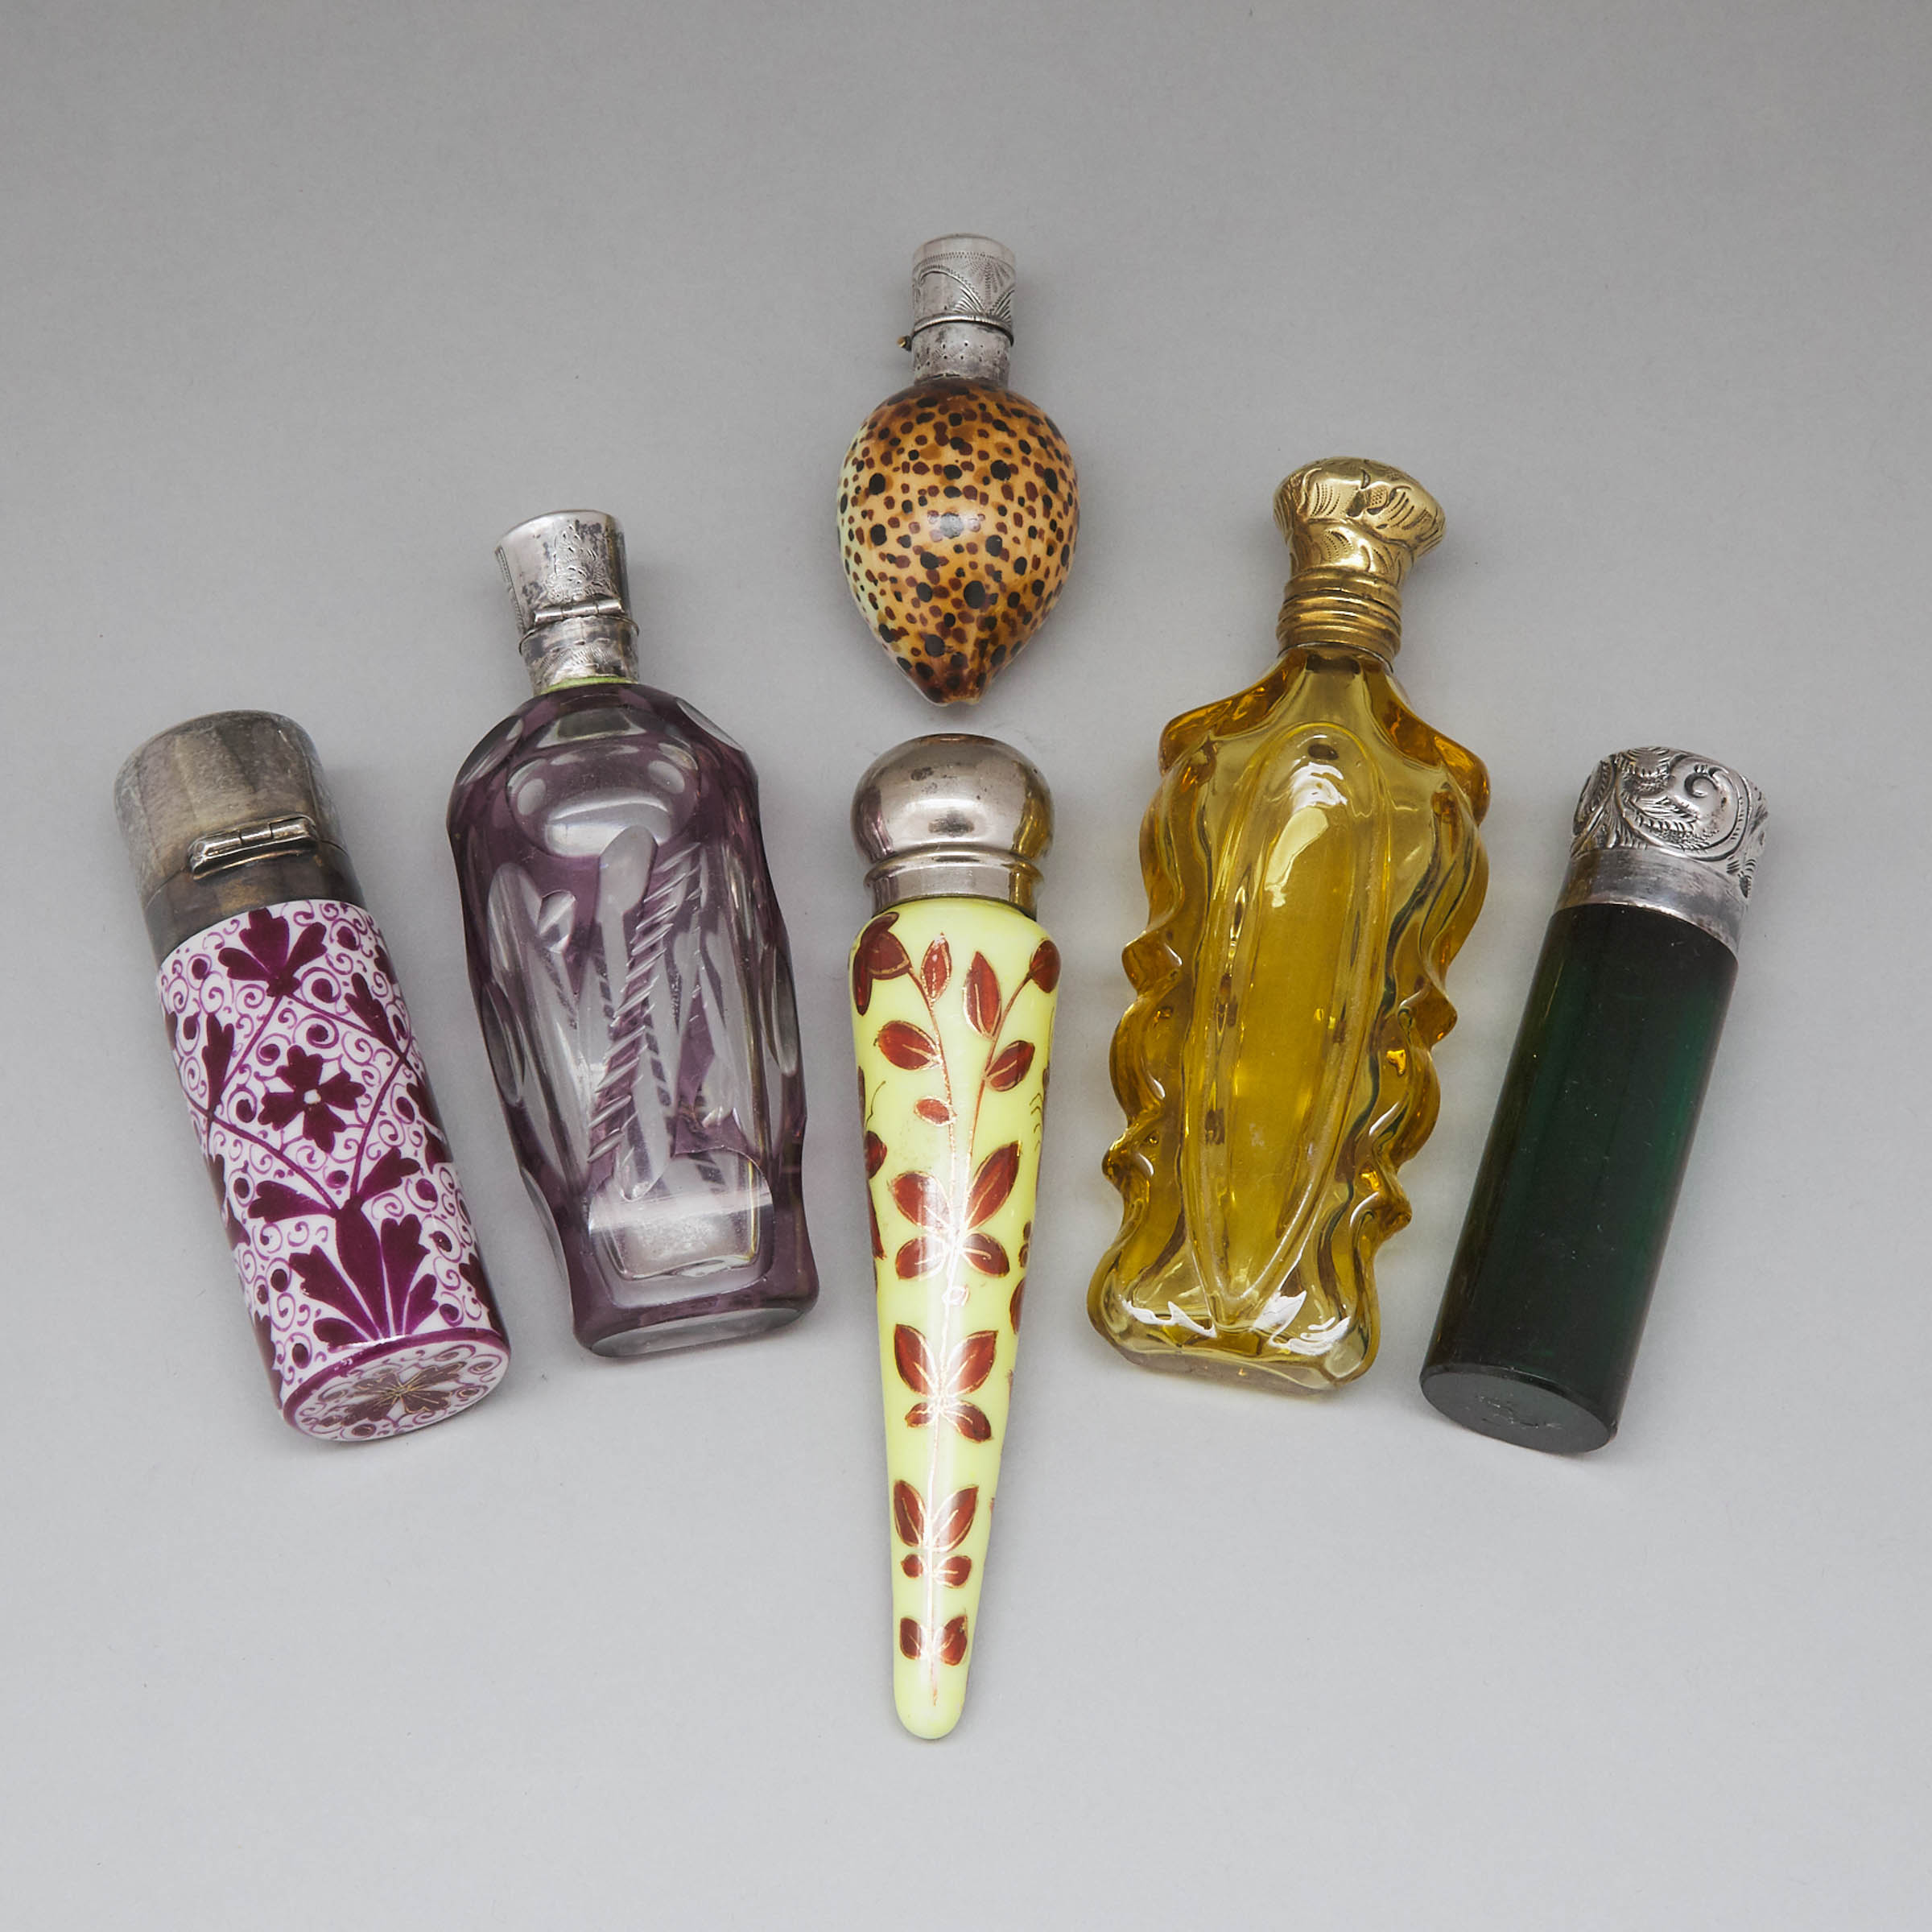 Six Silver and Metal Mounted Coloured, Cut and Enameled Glass Perfume Bottles and Phials, late 19th/early 20th century